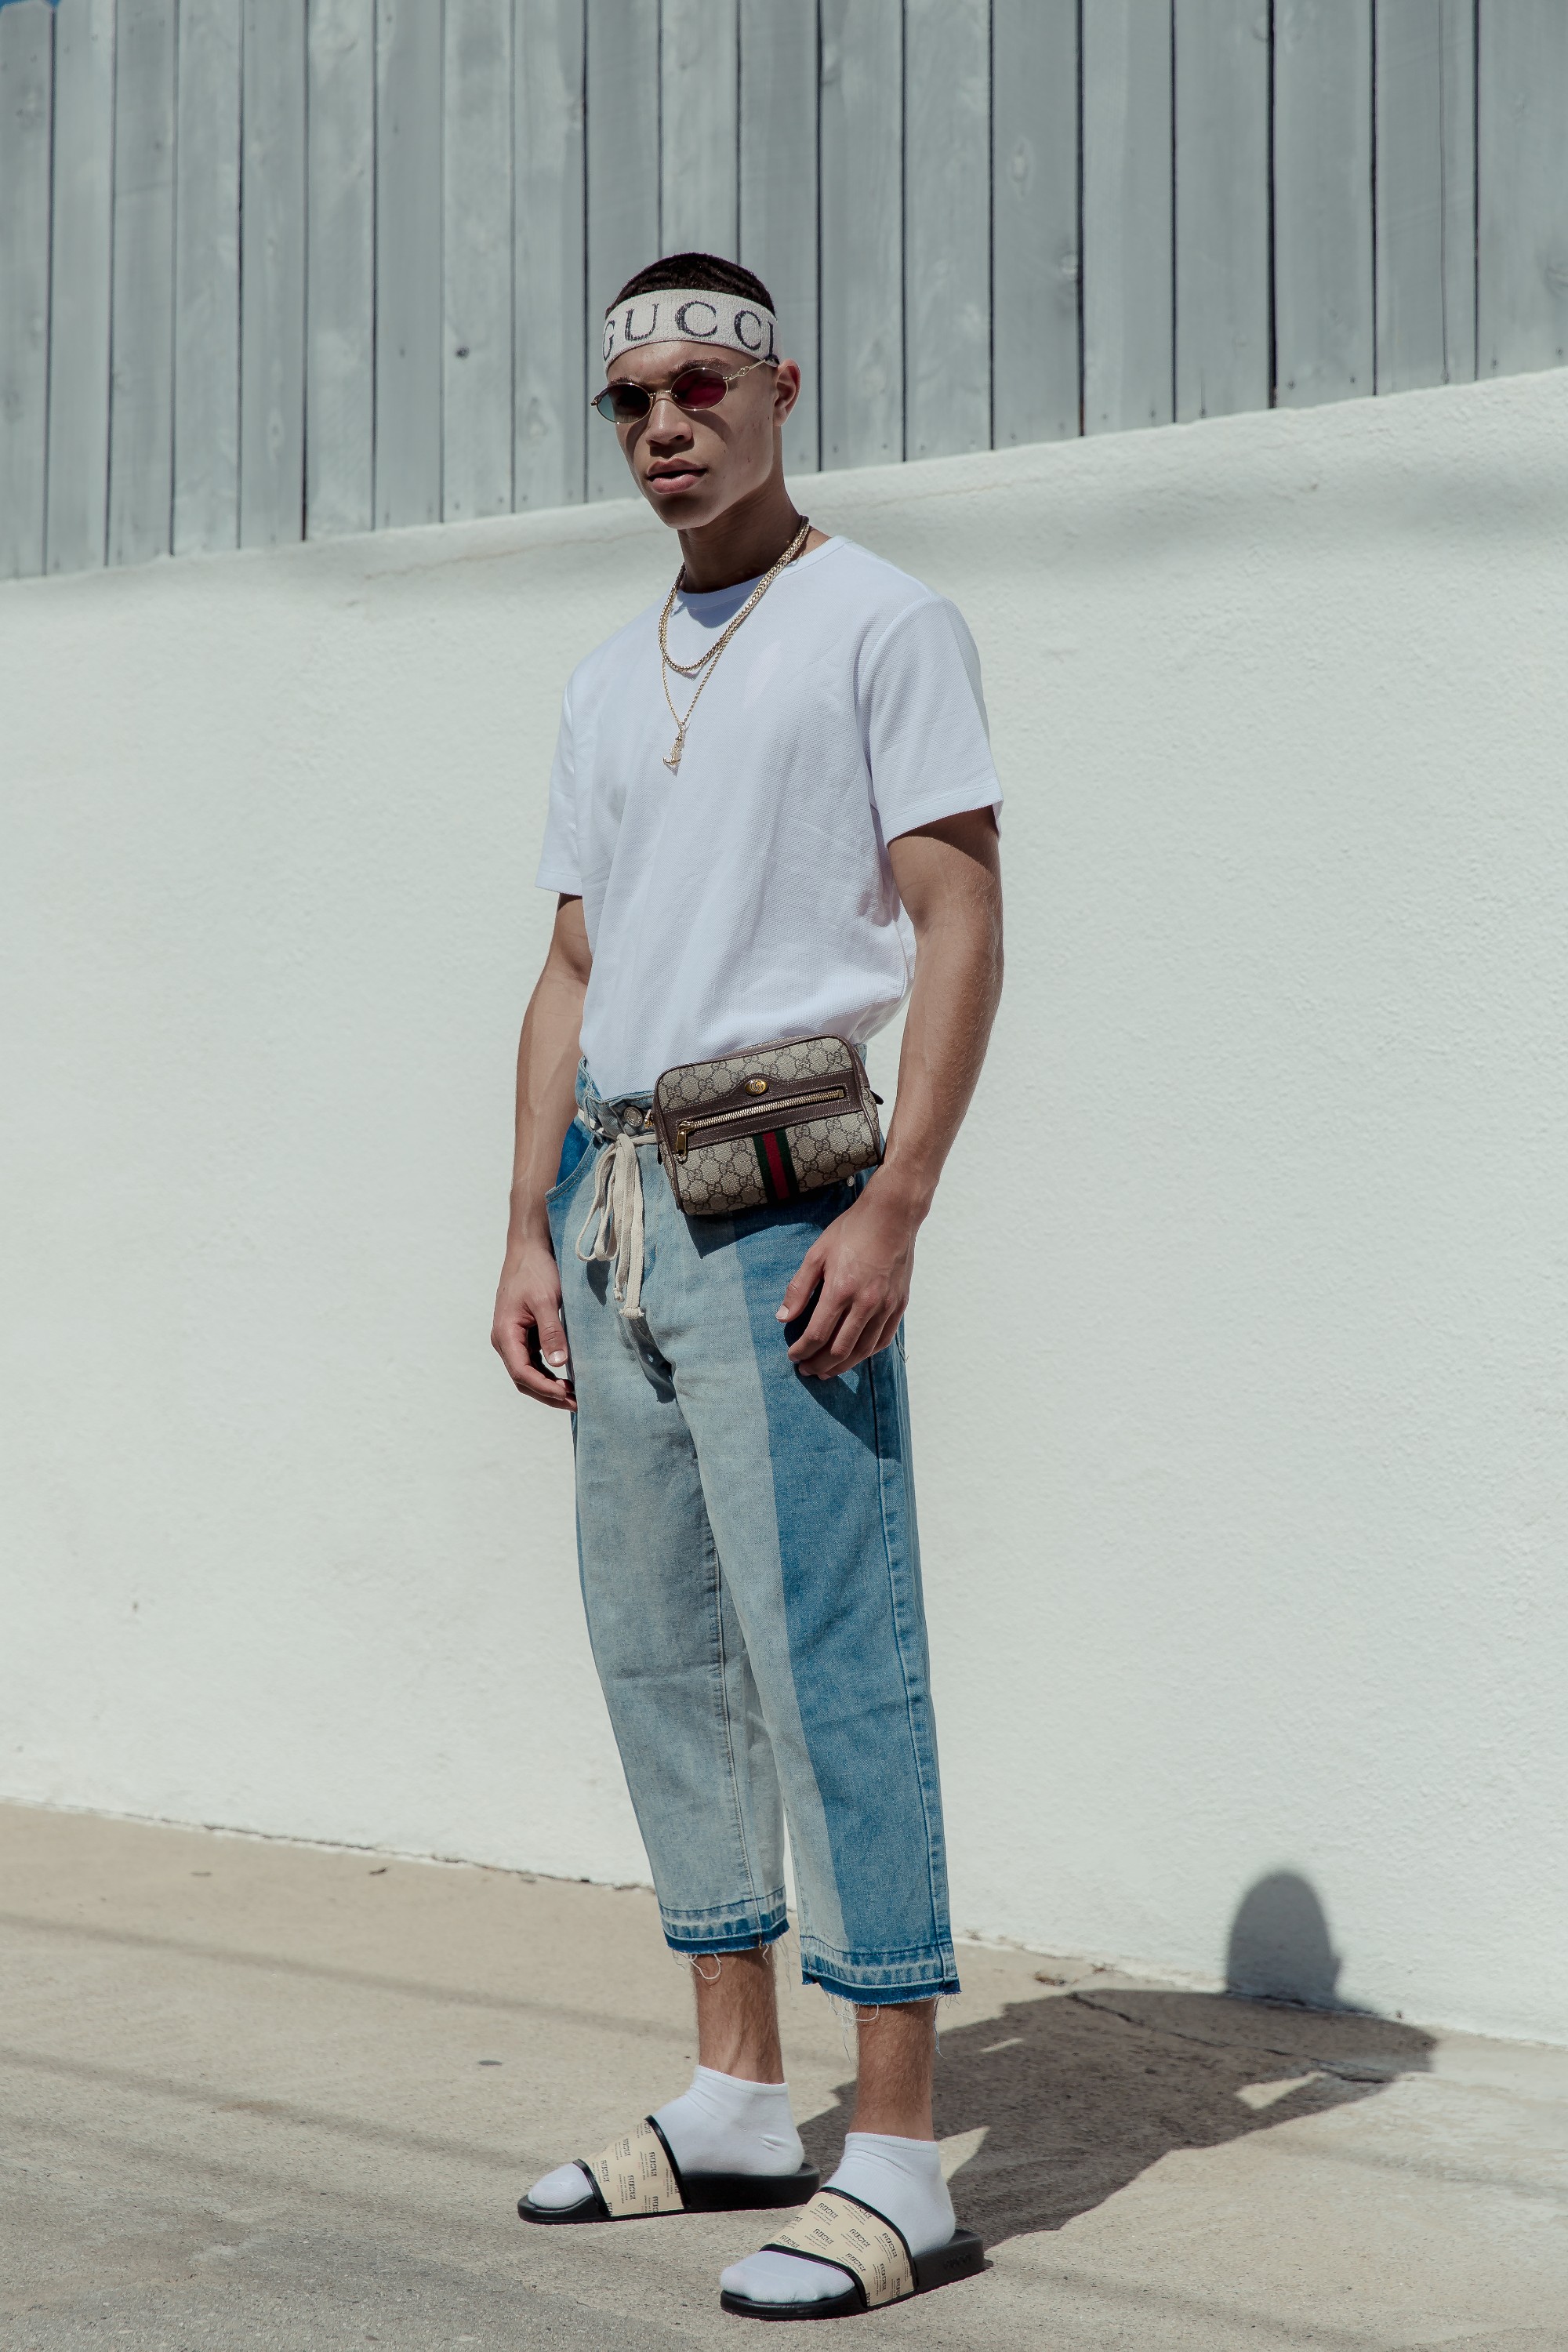 PAUSE Meets: Brian Whittaker – PAUSE Online | Men's Fashion, Street ...